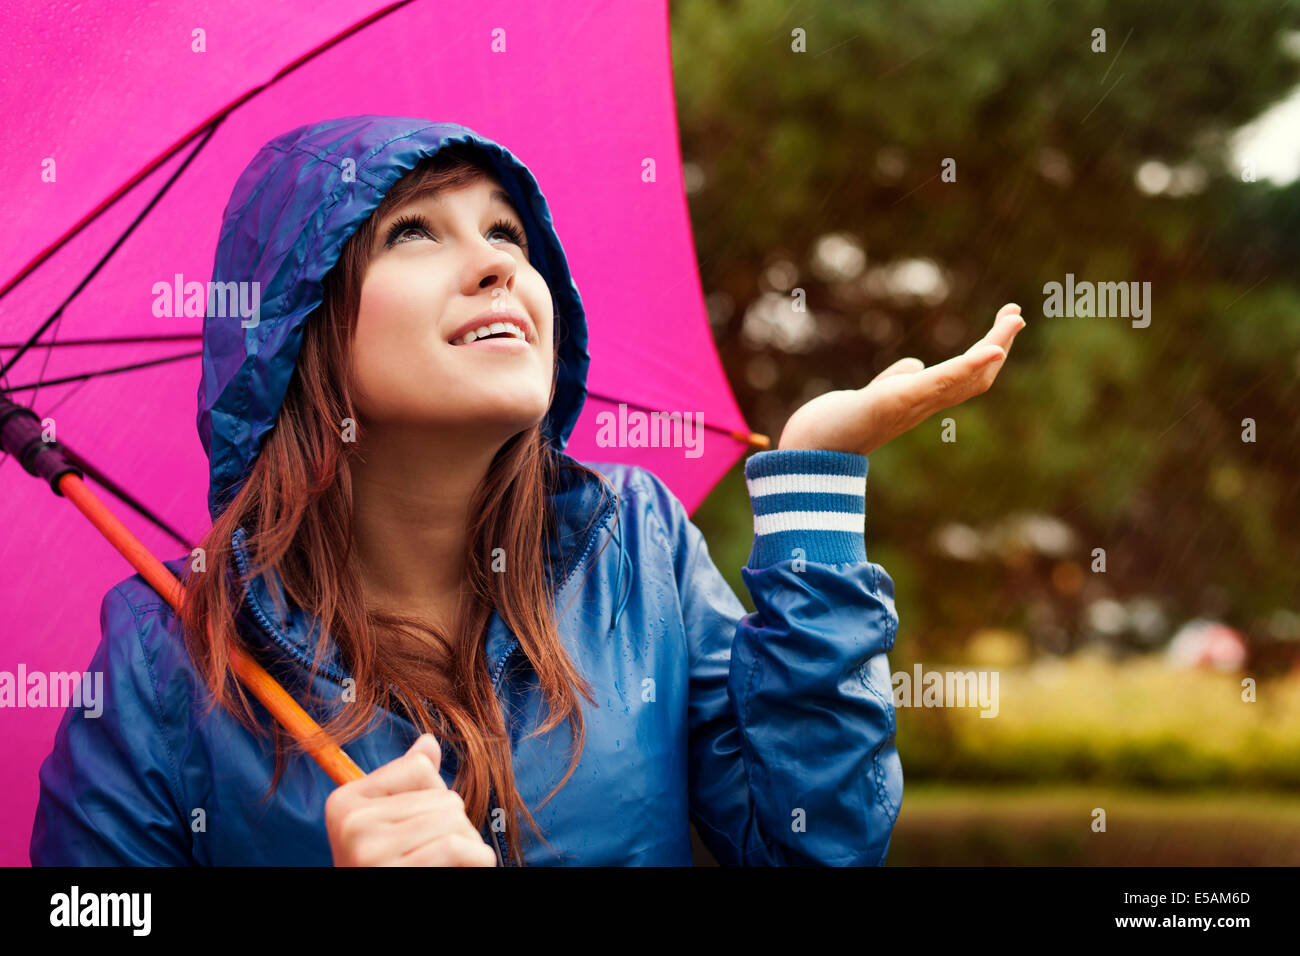 Beautiful young woman in raincoat with umbrella checking for rain, Debica, Poland Stock Photo